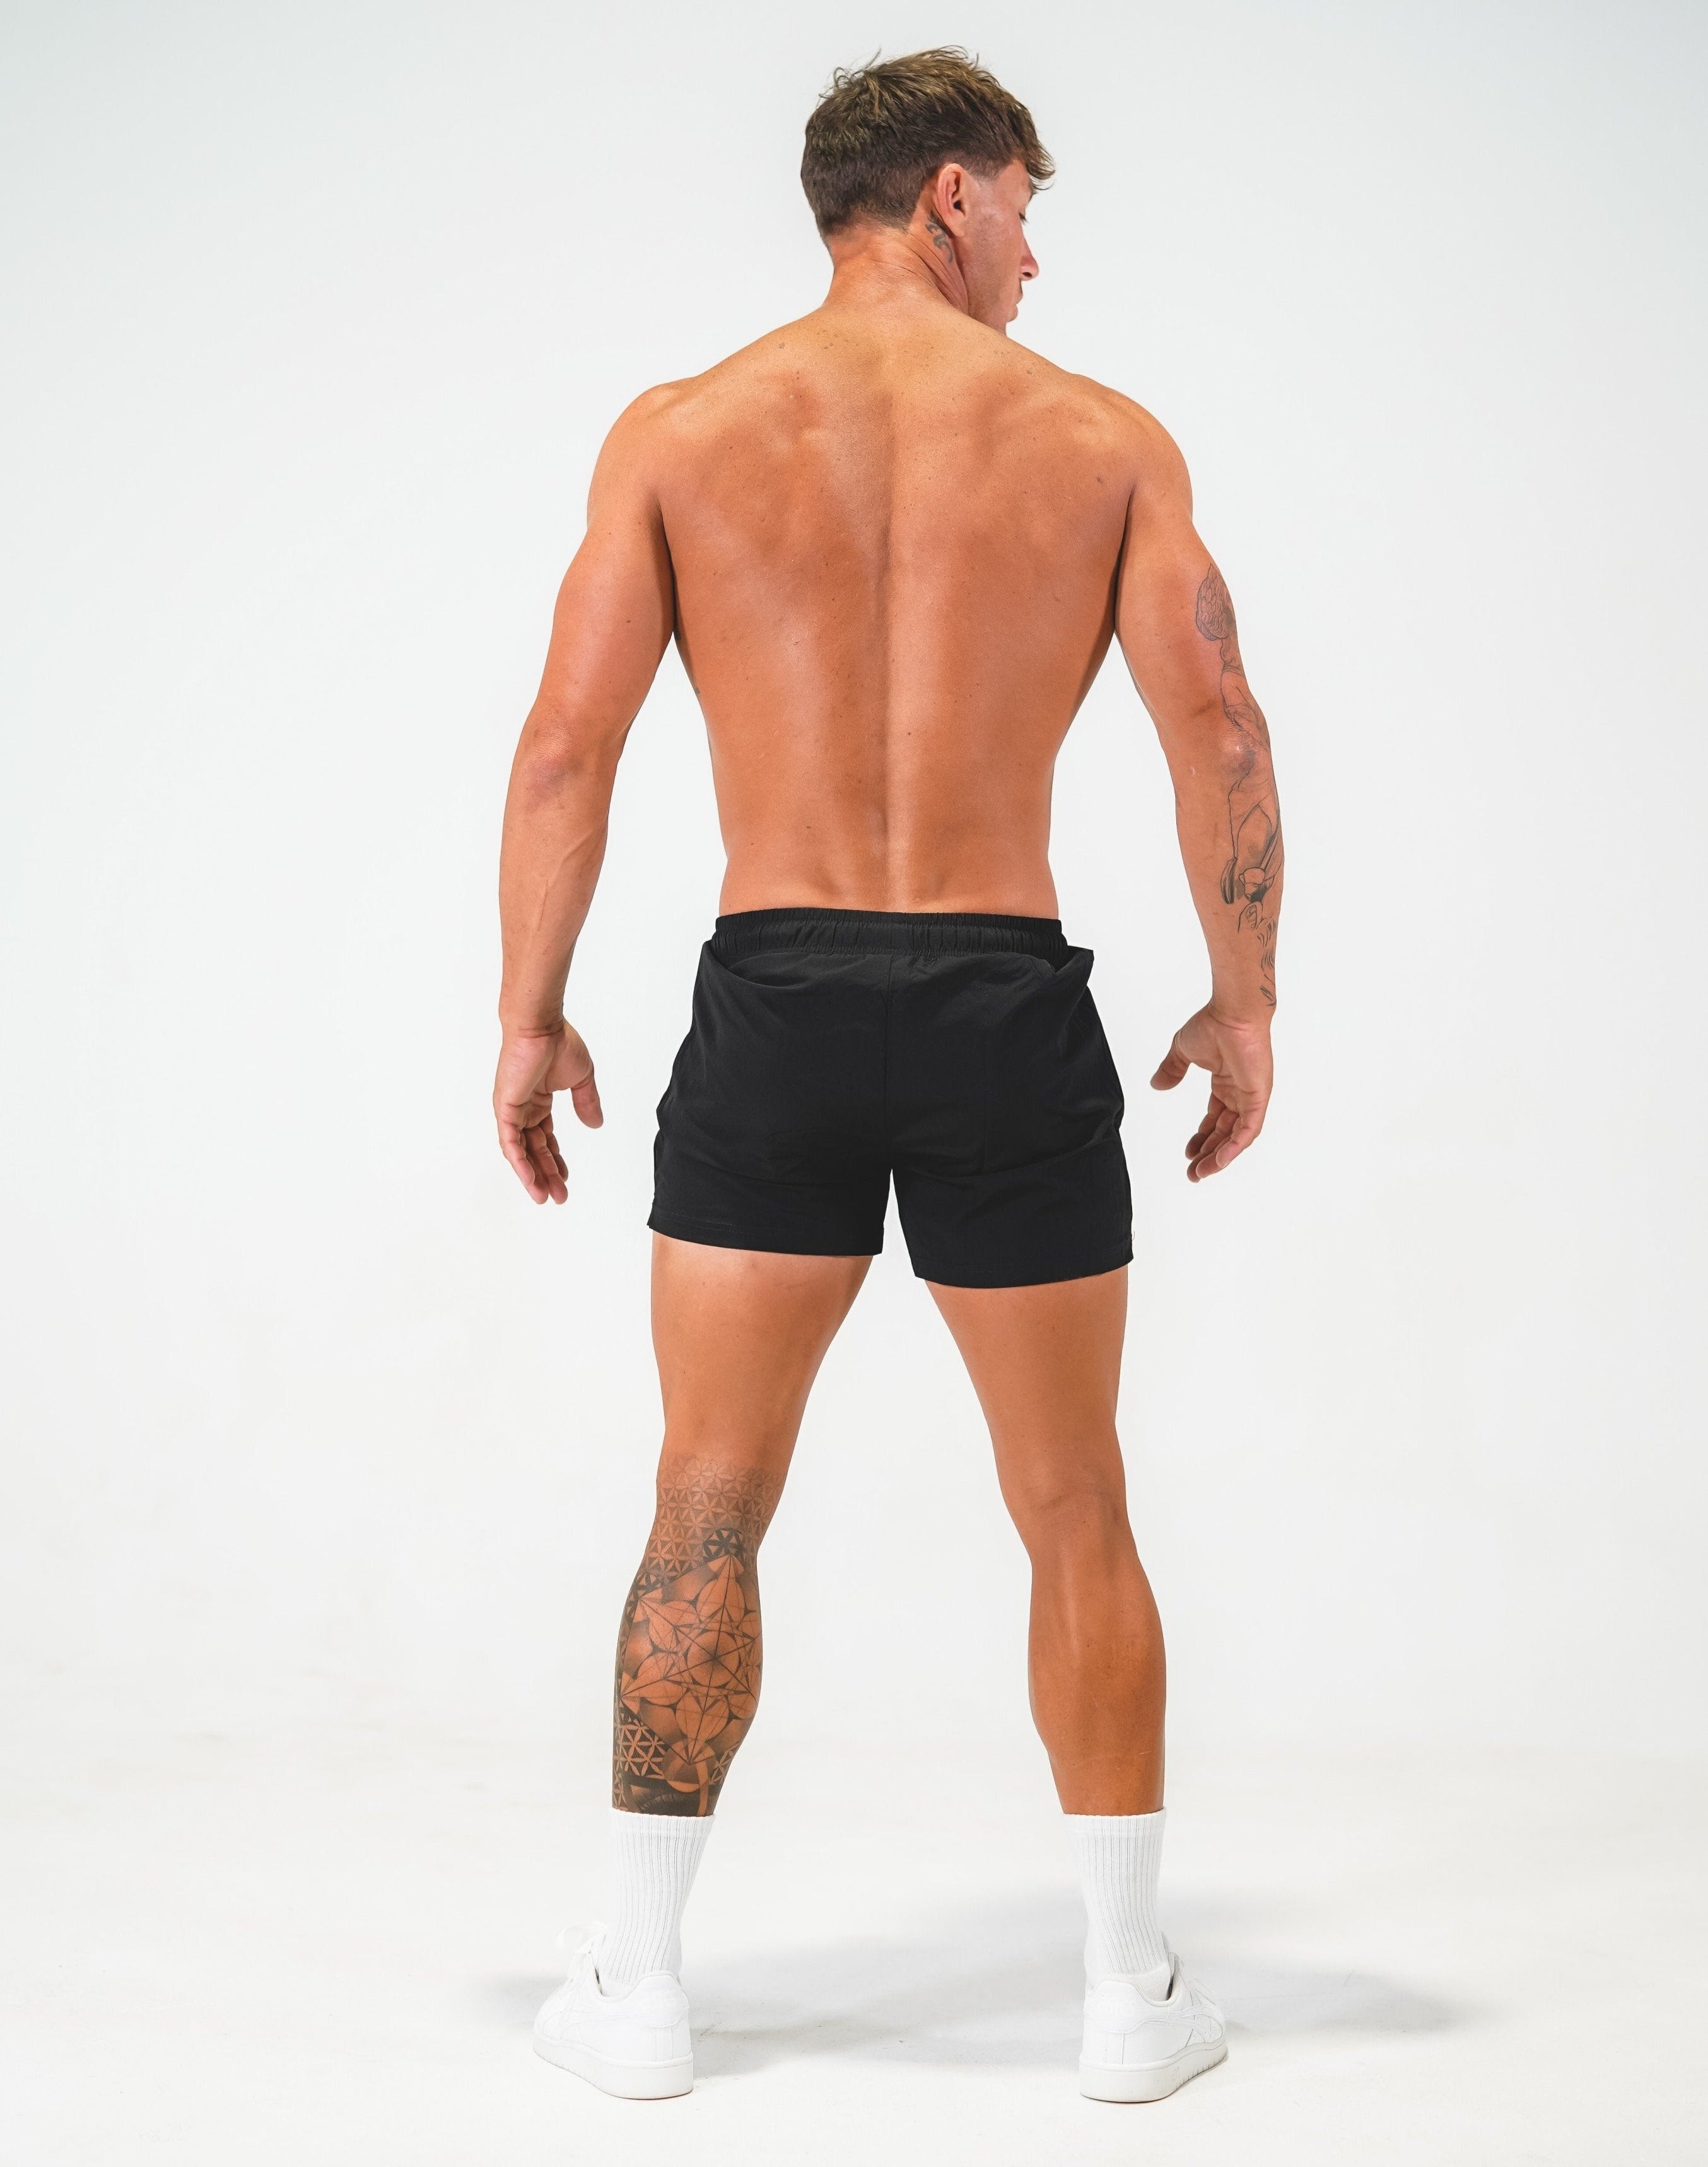 Roo Shorts - Black - GYMROOS